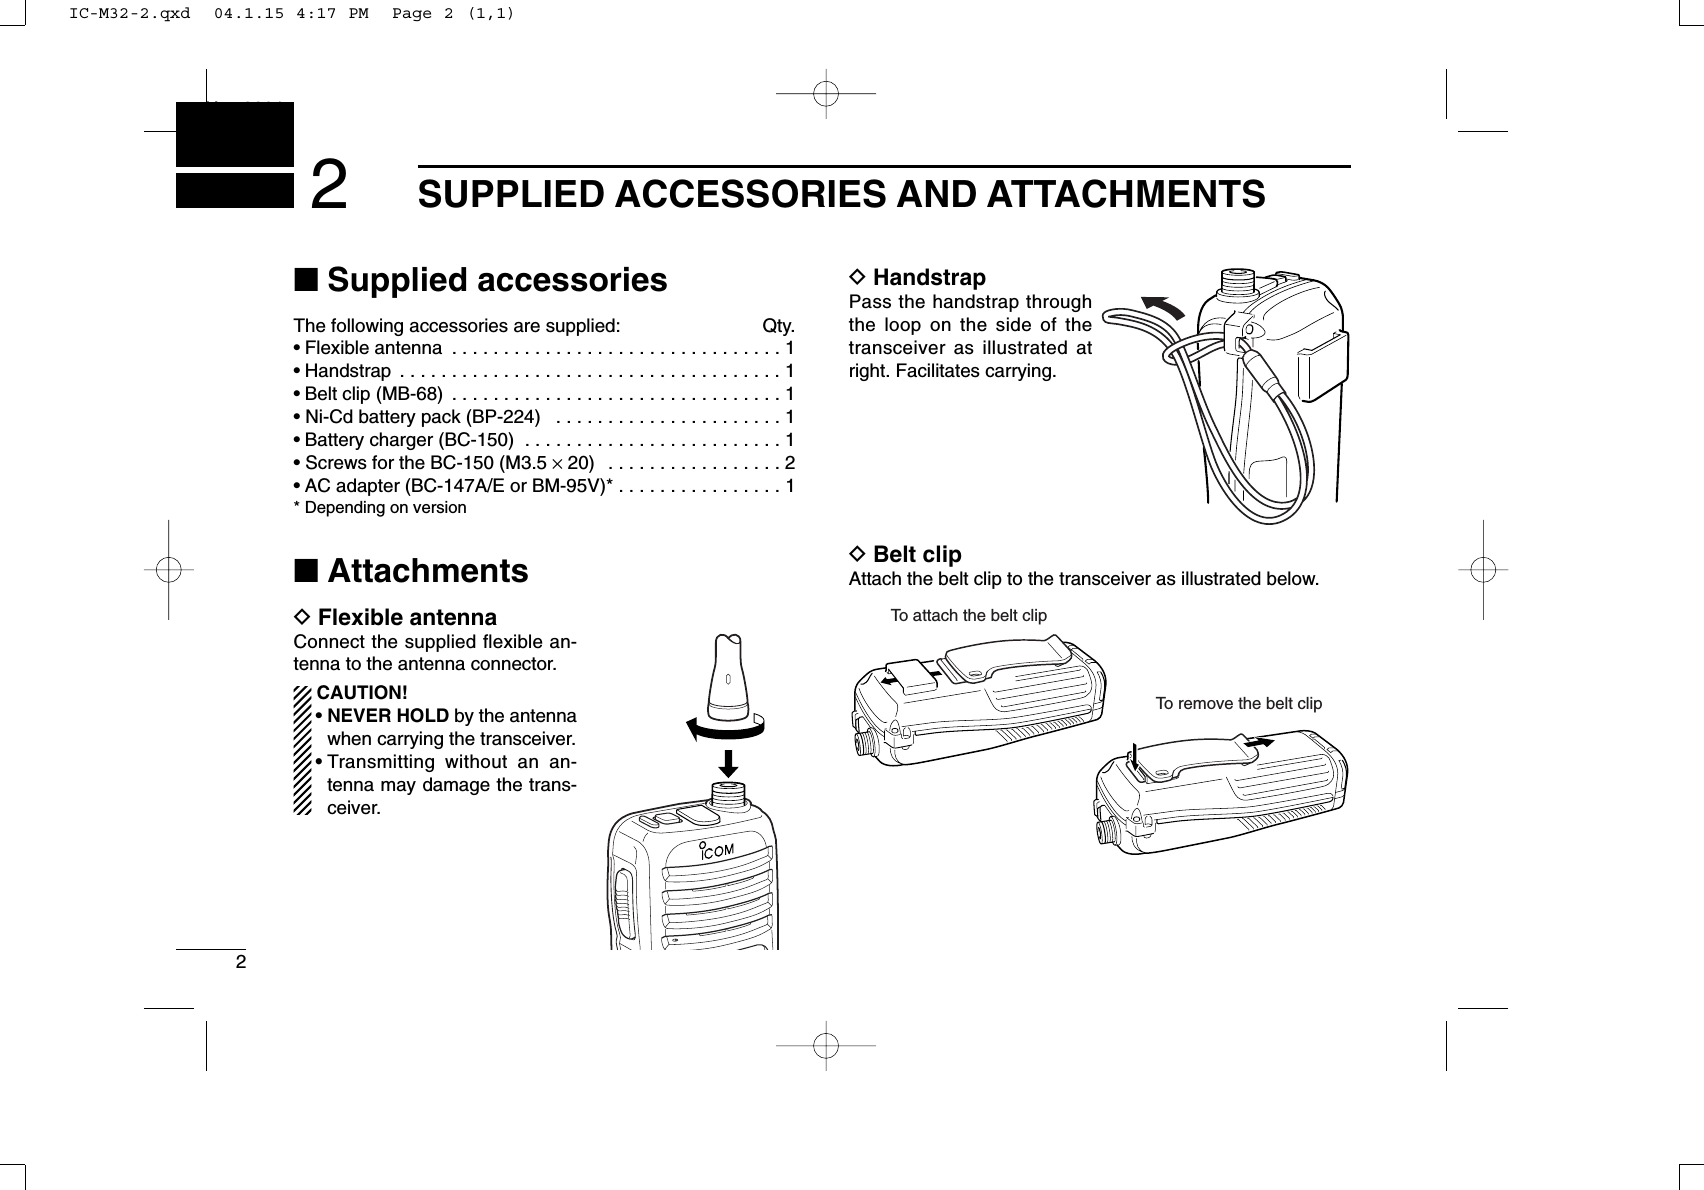 2SUPPLIED ACCESSORIES AND ATTACHMENTSNew20012■Supplied accessoriesThe following accessories are supplied: Qty.• Flexible antenna  . . . . . . . . . . . . . . . . . . . . . . . . . . . . . . . . 1• Handstrap  . . . . . . . . . . . . . . . . . . . . . . . . . . . . . . . . . . . . . 1• Belt clip (MB-68)  . . . . . . . . . . . . . . . . . . . . . . . . . . . . . . . . 1• Ni-Cd battery pack (BP-224)  . . . . . . . . . . . . . . . . . . . . . . 1• Battery charger (BC-150)  . . . . . . . . . . . . . . . . . . . . . . . . . 1• Screws for the BC-150 (M3.5 ×20)  . . . . . . . . . . . . . . . . . 2• AC adapter (BC-147A/E or BM-95V)* . . . . . . . . . . . . . . . . 1* Depending on version■AttachmentsDFlexible antennaConnect the supplied flexible an-tenna to the antenna connector.CAUTION!• NEVER HOLD by the antennawhen carrying the transceiver.• Transmitting without an an-tenna may damage the trans-ceiver.DHandstrapPass the handstrap throughthe loop on the side of thetransceiver as illustrated atright. Facilitates carrying.DBelt clipAttach the belt clip to the transceiver as illustrated below.To attach the belt clipTo remove the belt clipIC-M32-2.qxd  04.1.15 4:17 PM  Page 2 (1,1)